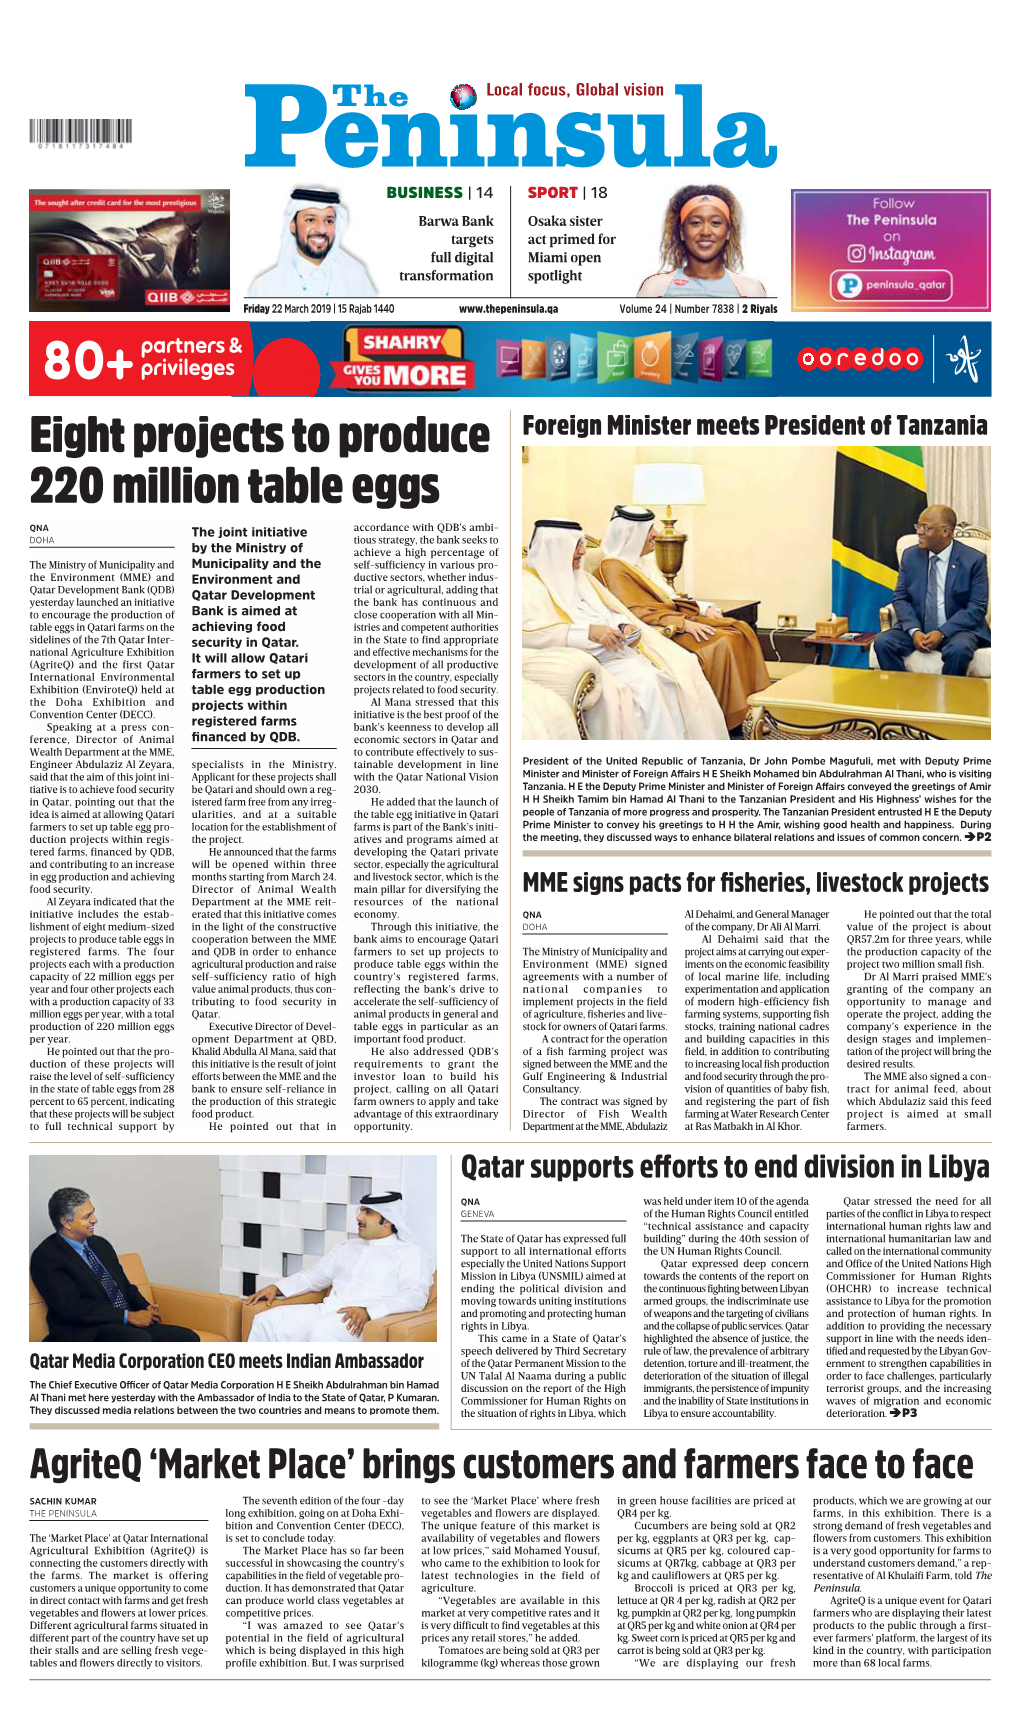 Eight Projects to Produce 220 Million Table Eggs